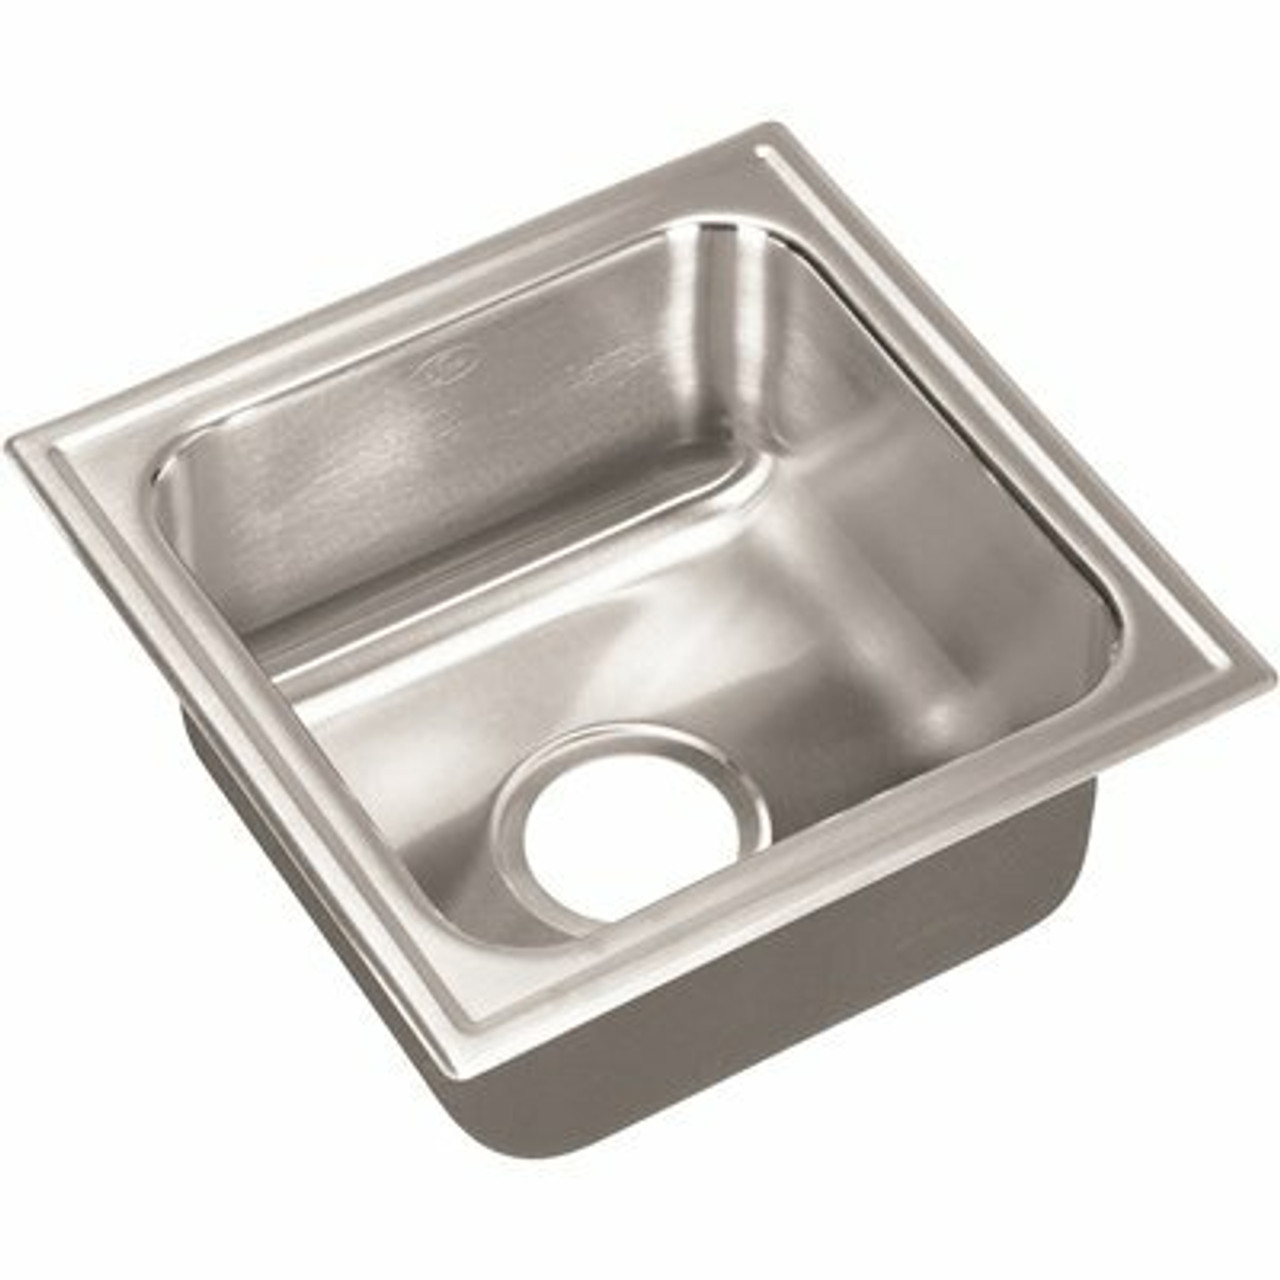 Just Manufacturing 18-Gauge Stainless Steel 15 In. O.D. X 15 In. Single Bowl Drop-In Kitchen Sink With Self-Rimming Ledge